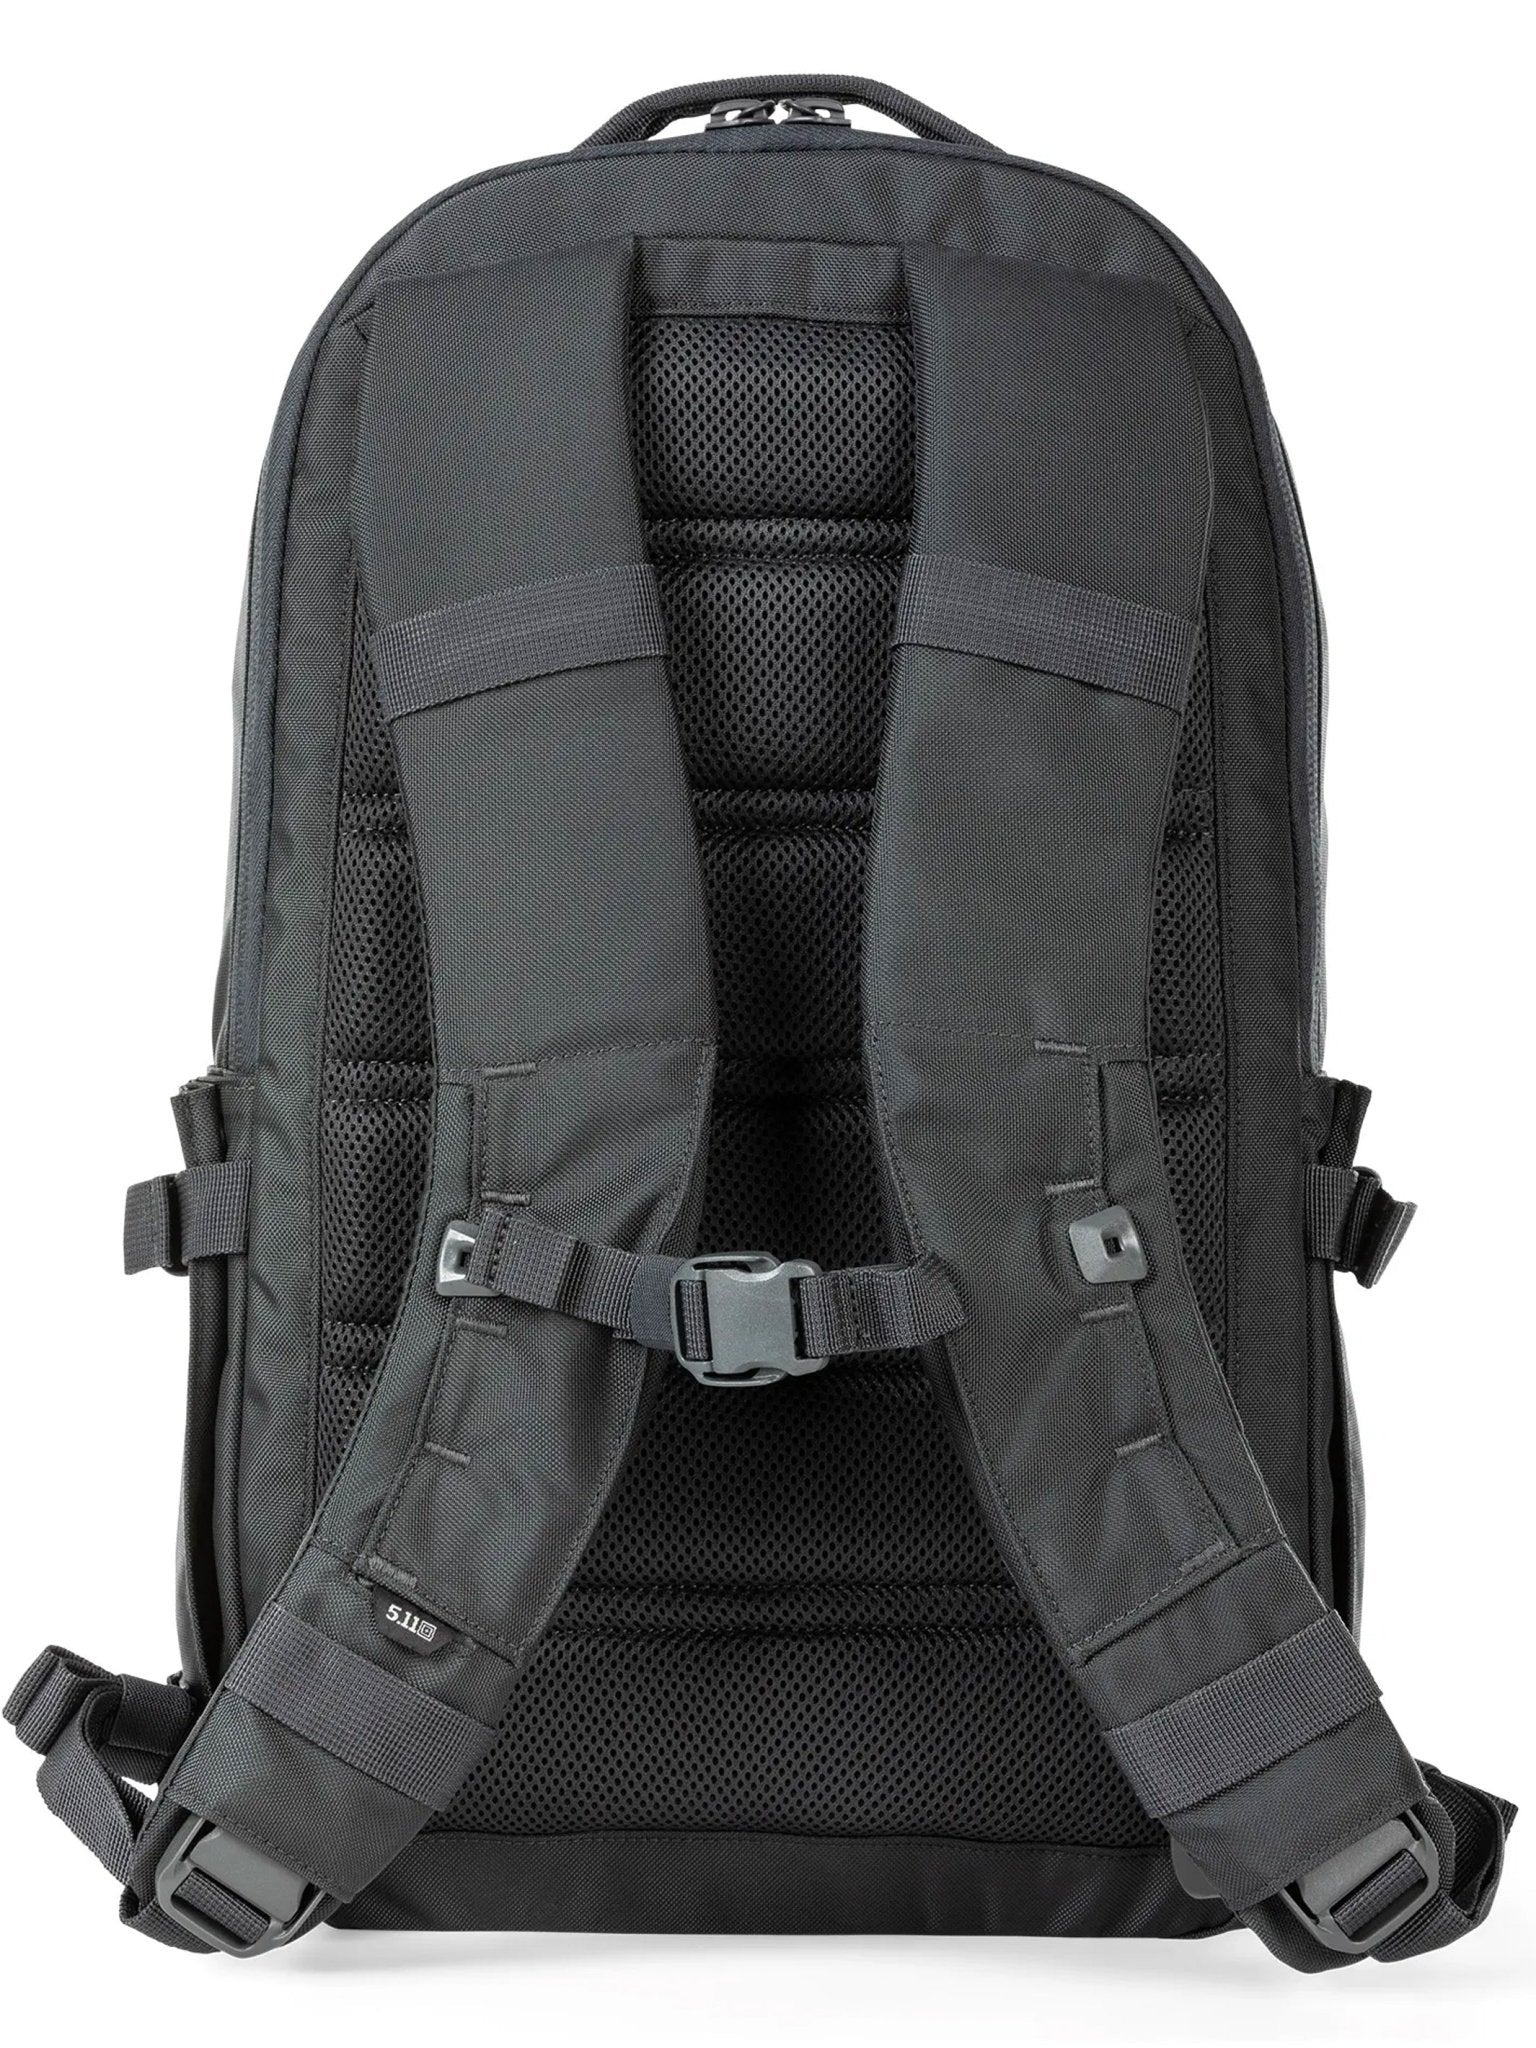 4elementsclothing5.11 Tactical5.11 Tactical - 5.11 Tactical LV18 BACKPACK 2.0 30L - Style 56700Bag56700-042